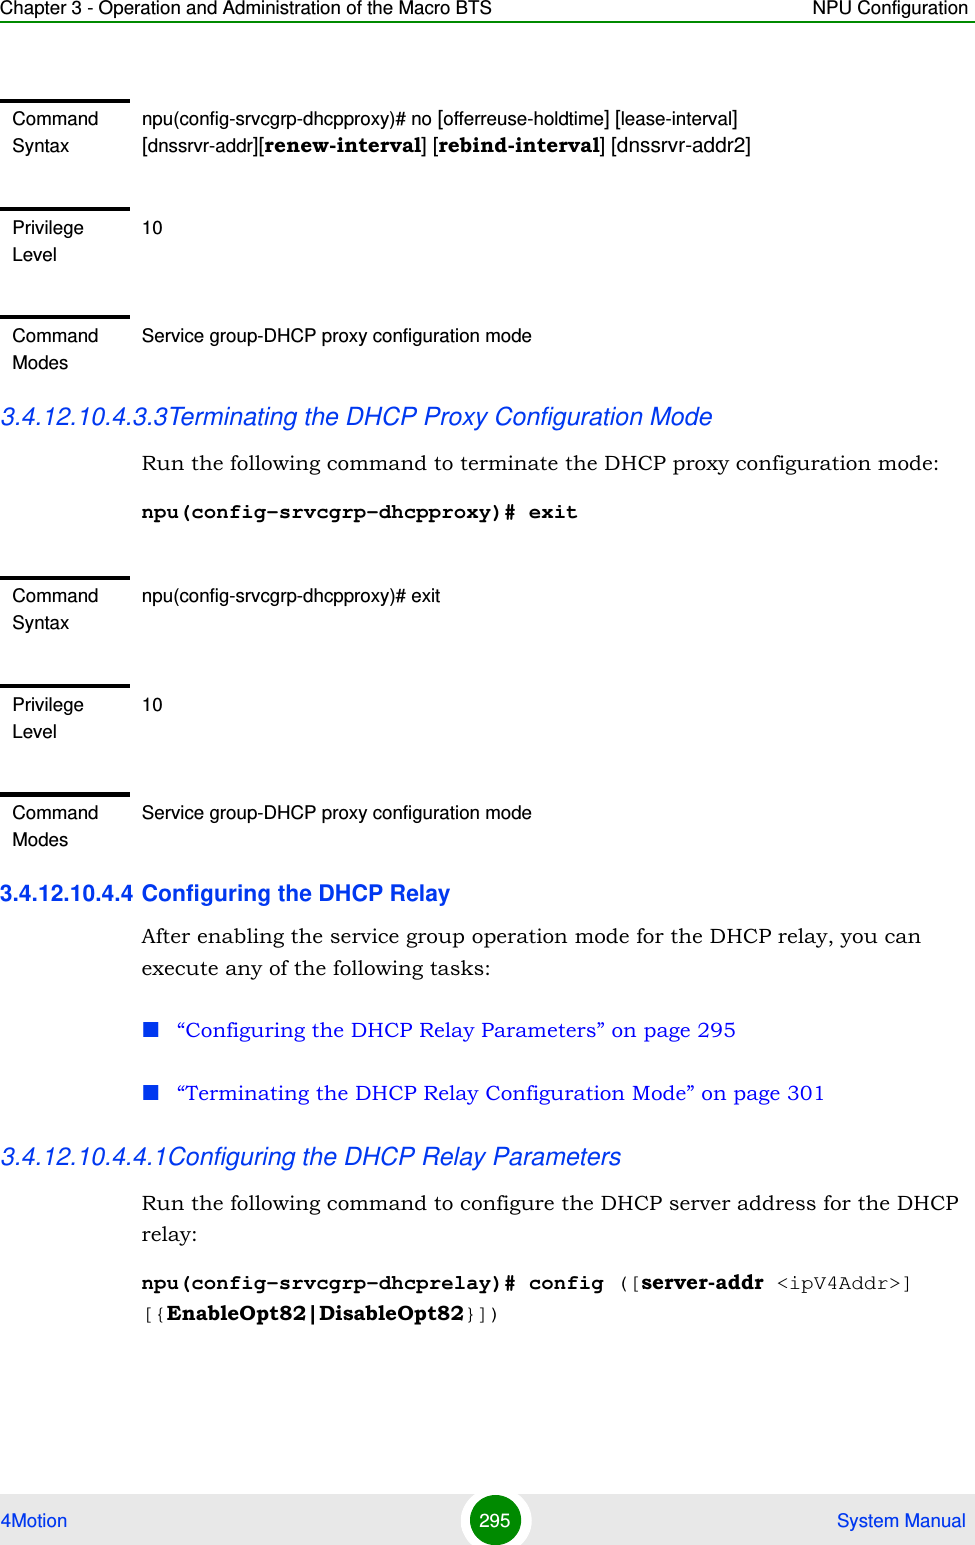 Chapter 3 - Operation and Administration of the Macro BTS NPU Configuration4Motion 295  System Manual3.4.12.10.4.3.3Terminating the DHCP Proxy Configuration ModeRun the following command to terminate the DHCP proxy configuration mode: npu(config-srvcgrp-dhcpproxy)# exit3.4.12.10.4.4 Configuring the DHCP RelayAfter enabling the service group operation mode for the DHCP relay, you can execute any of the following tasks:“Configuring the DHCP Relay Parameters” on page 295“Terminating the DHCP Relay Configuration Mode” on page 3013.4.12.10.4.4.1Configuring the DHCP Relay ParametersRun the following command to configure the DHCP server address for the DHCP relay:npu(config-srvcgrp-dhcprelay)# config ([server-addr &lt;ipV4Addr&gt;] [{EnableOpt82|DisableOpt82}])Command Syntaxnpu(config-srvcgrp-dhcpproxy)# no [offerreuse-holdtime] [lease-interval] [dnssrvr-addr][renew-interval] [rebind-interval] [dnssrvr-addr2]Privilege Level10Command ModesService group-DHCP proxy configuration modeCommand Syntaxnpu(config-srvcgrp-dhcpproxy)# exitPrivilege Level10Command ModesService group-DHCP proxy configuration mode